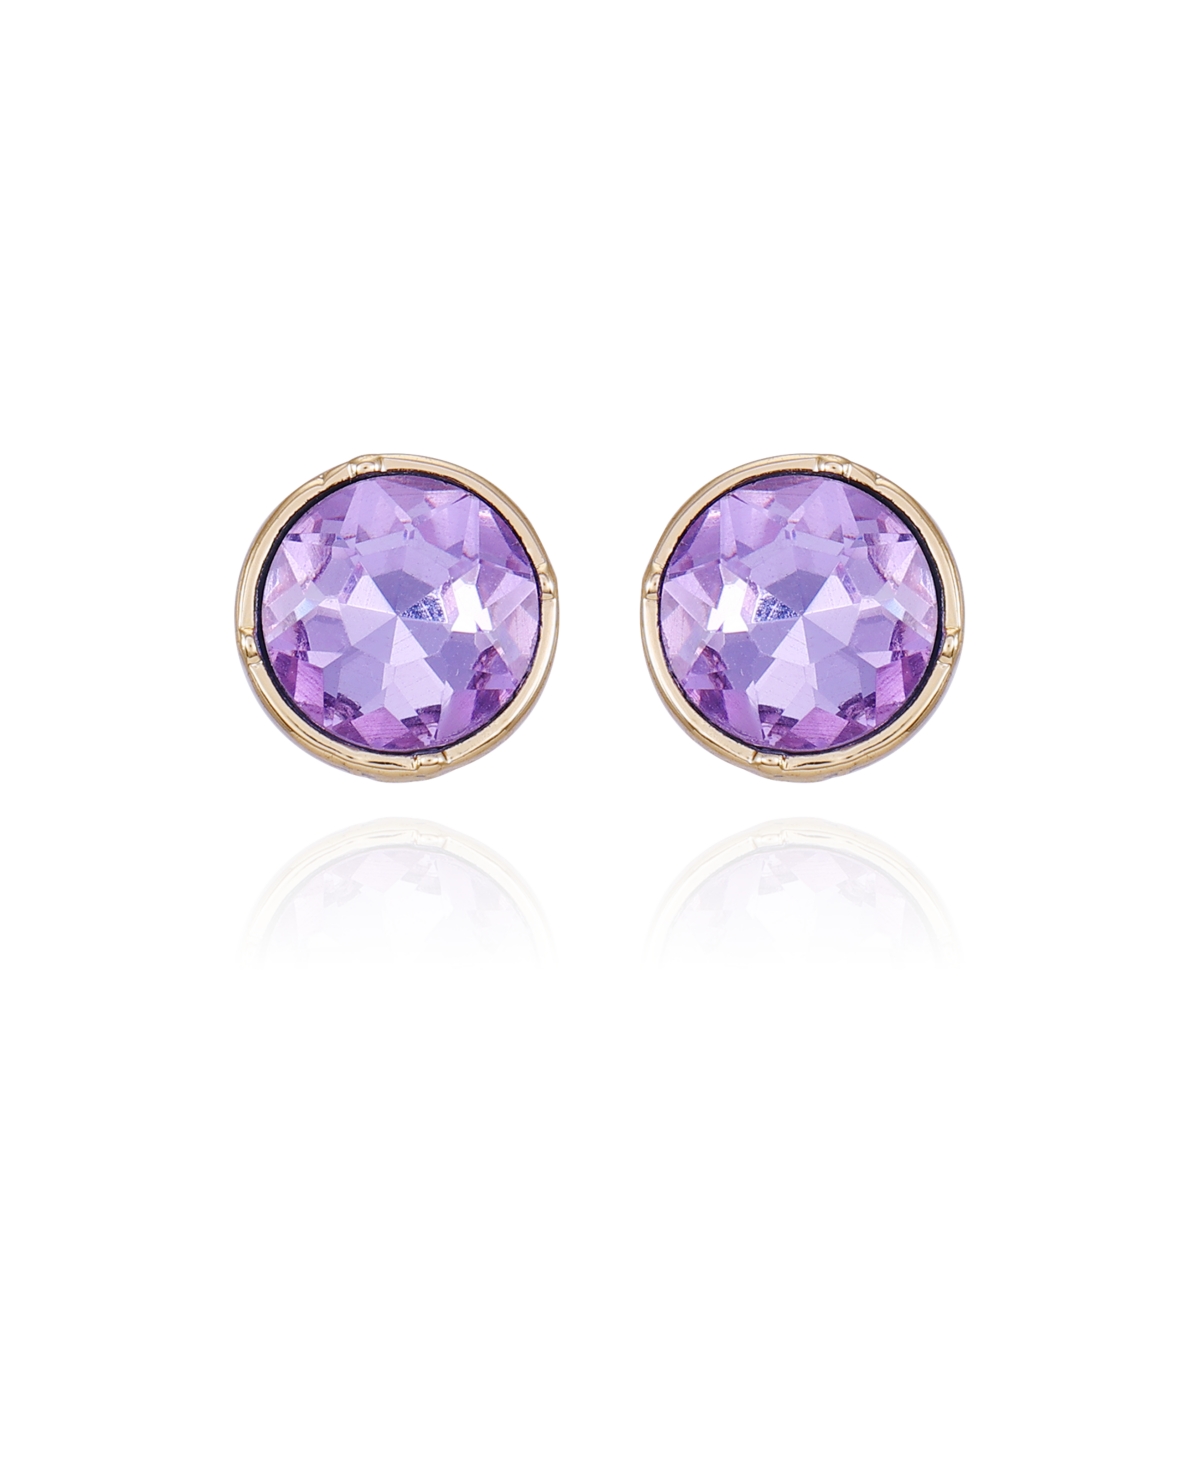 Gold-Tone Lilac Violet Glass Stone Stud Earrings - Gold